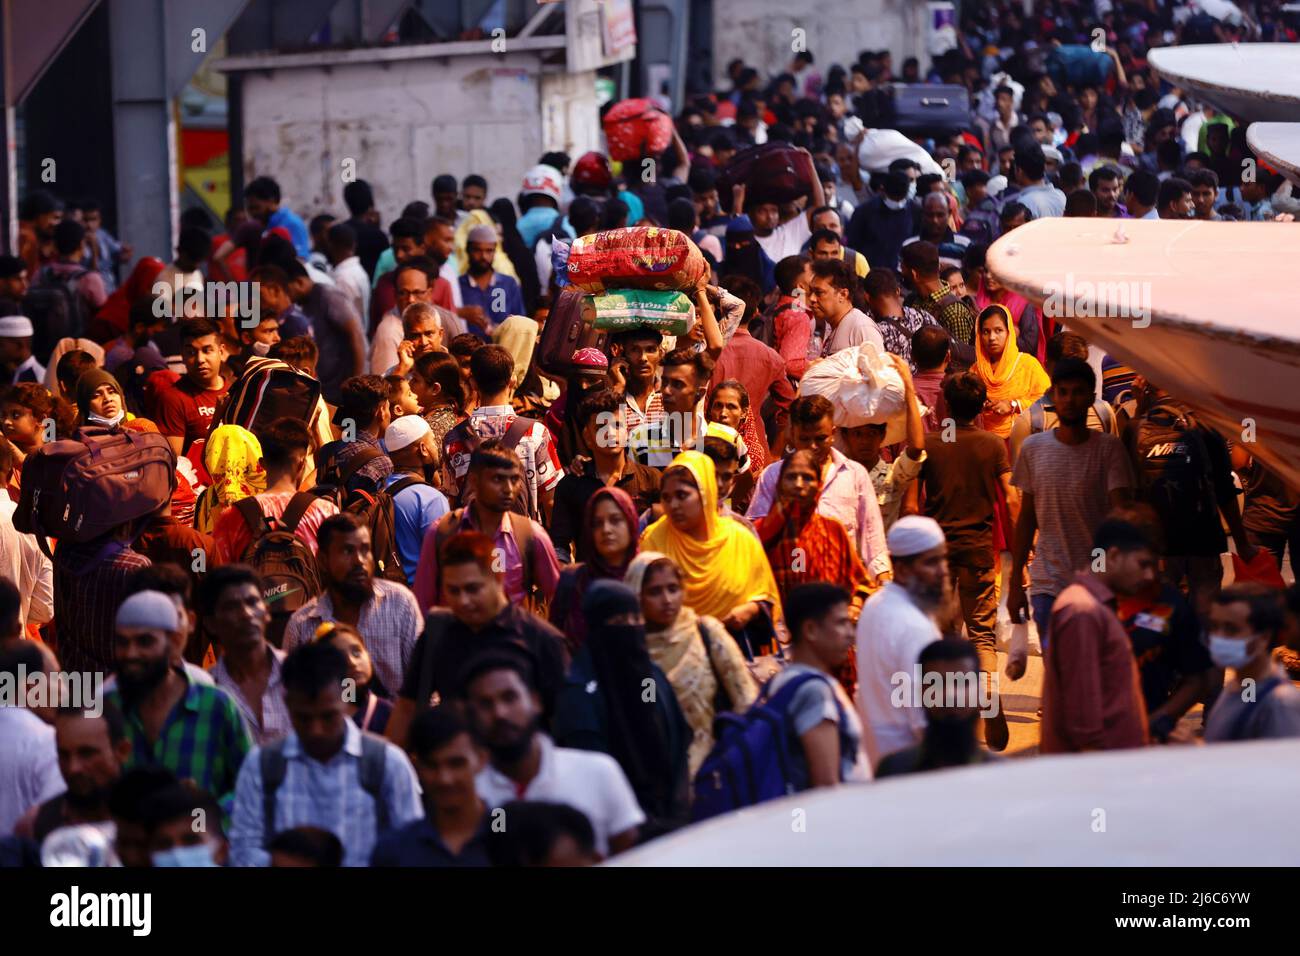 People gather to get onboard passenger ferries to travel home to celebrate Eid al-Fitr, at the Sadarghat Launch Terminal, in Dhaka, Bangladesh, April 30, 2022. REUTERS/Mohammad Ponir Hossain Stock Photo